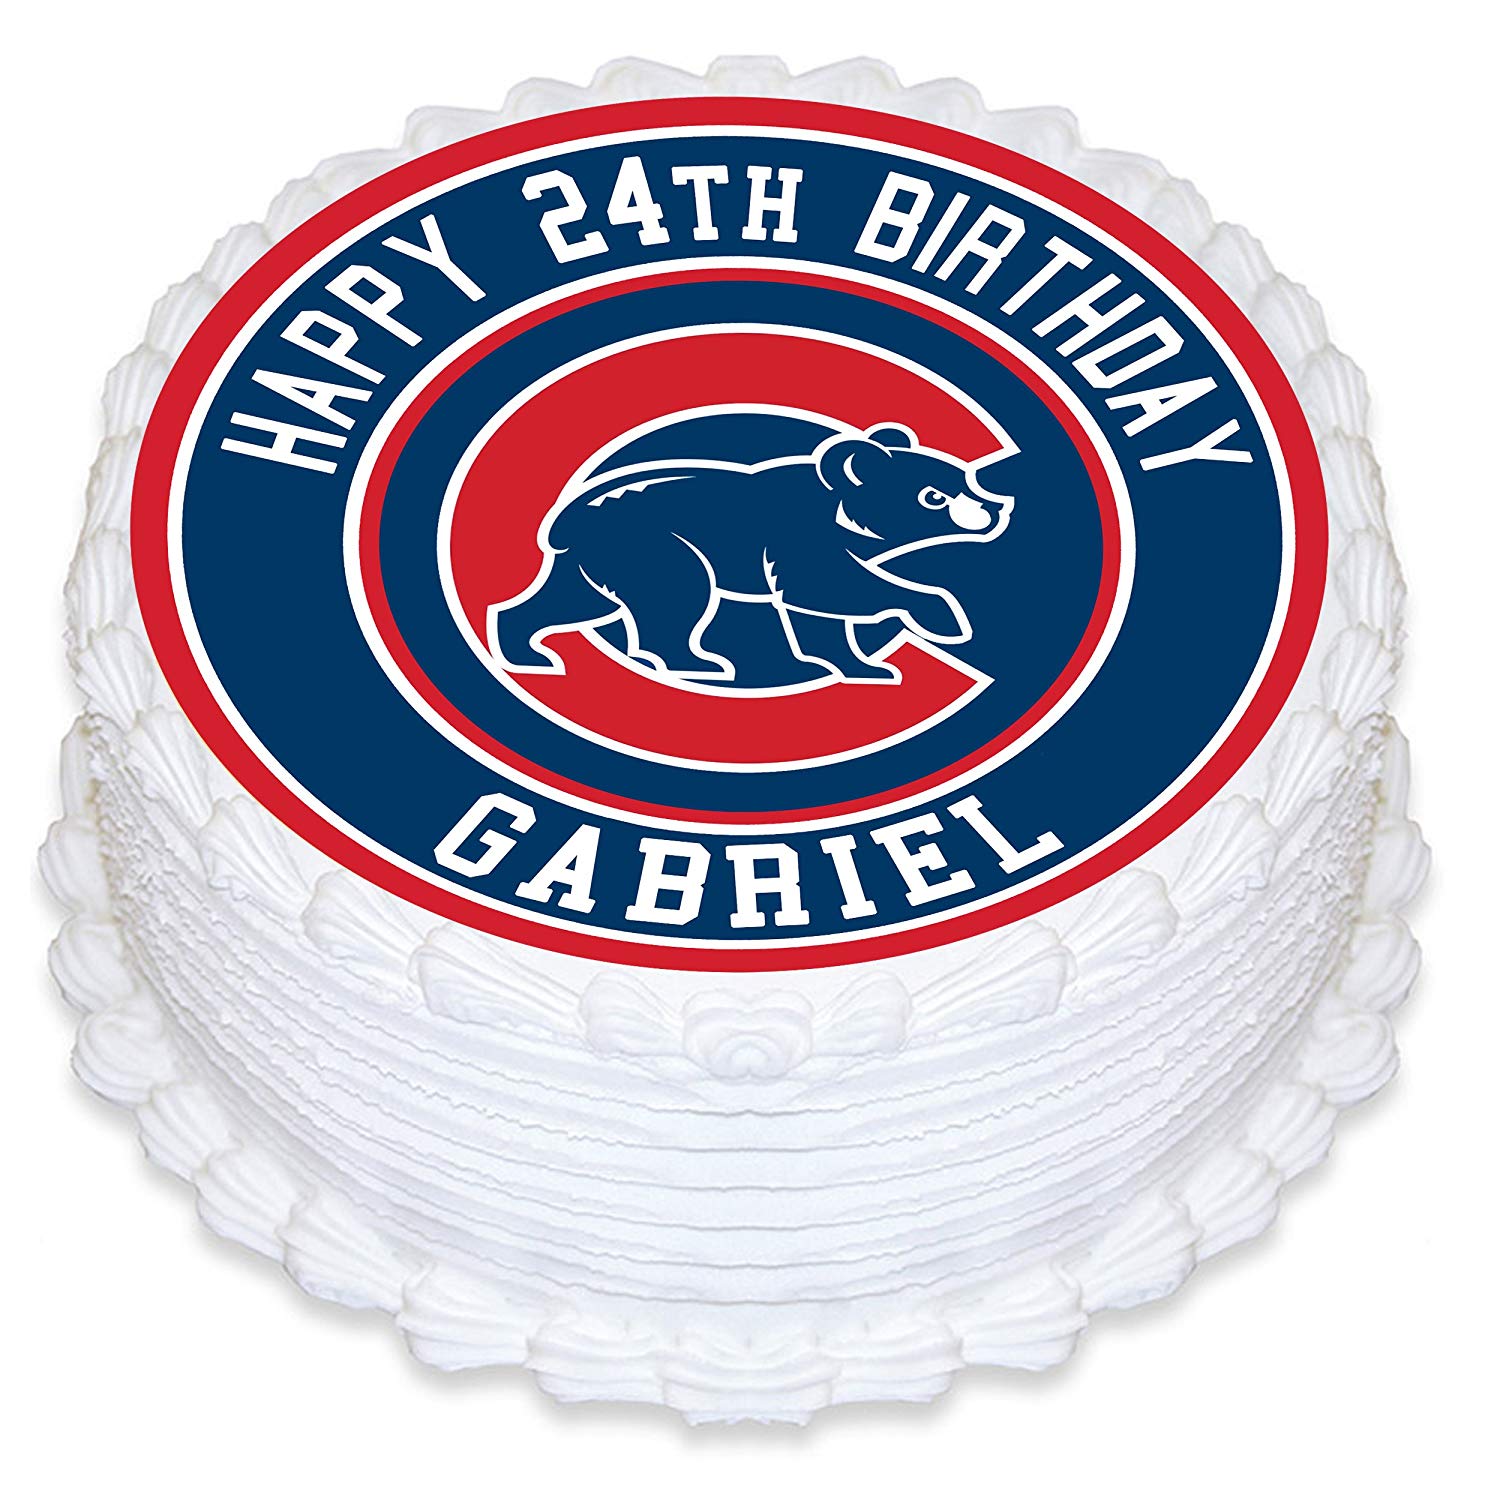 Round Cake with Piped Cubs Logo and Pinstripes — Trefzger's Bakery | Bakery  cakes, Cake, Cake recipes